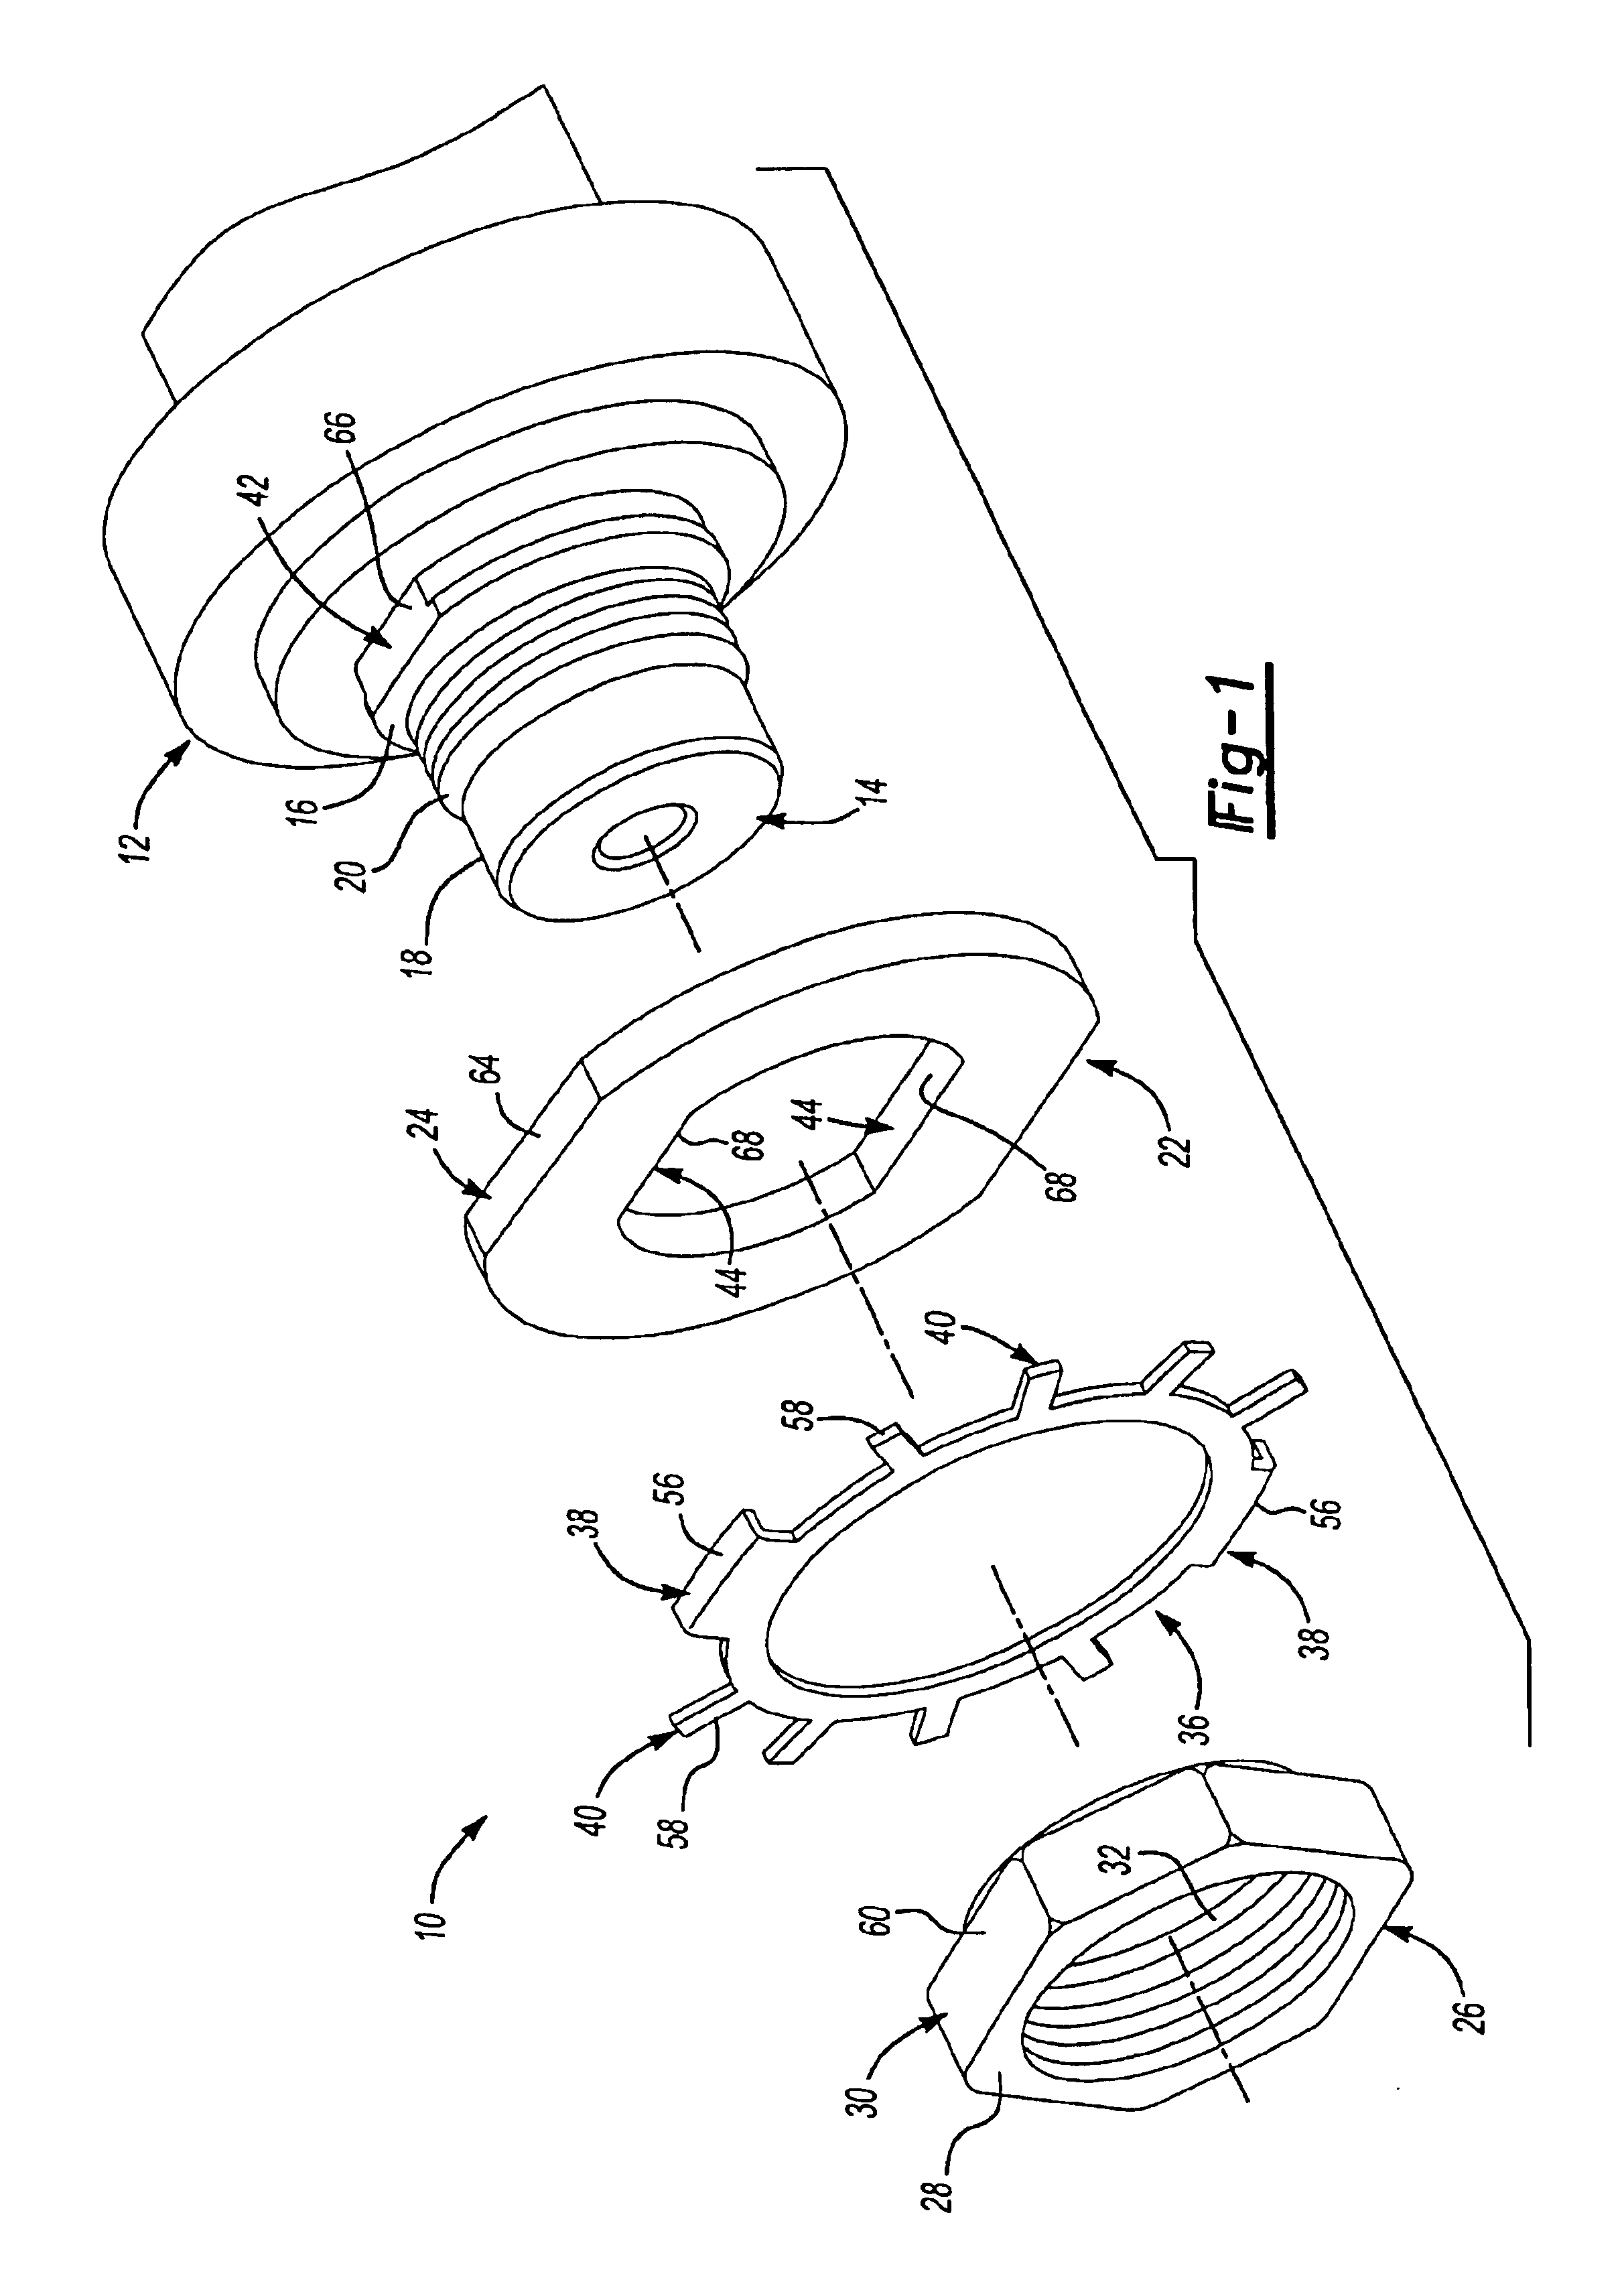 Combination lock washer and spindle bearing assembly